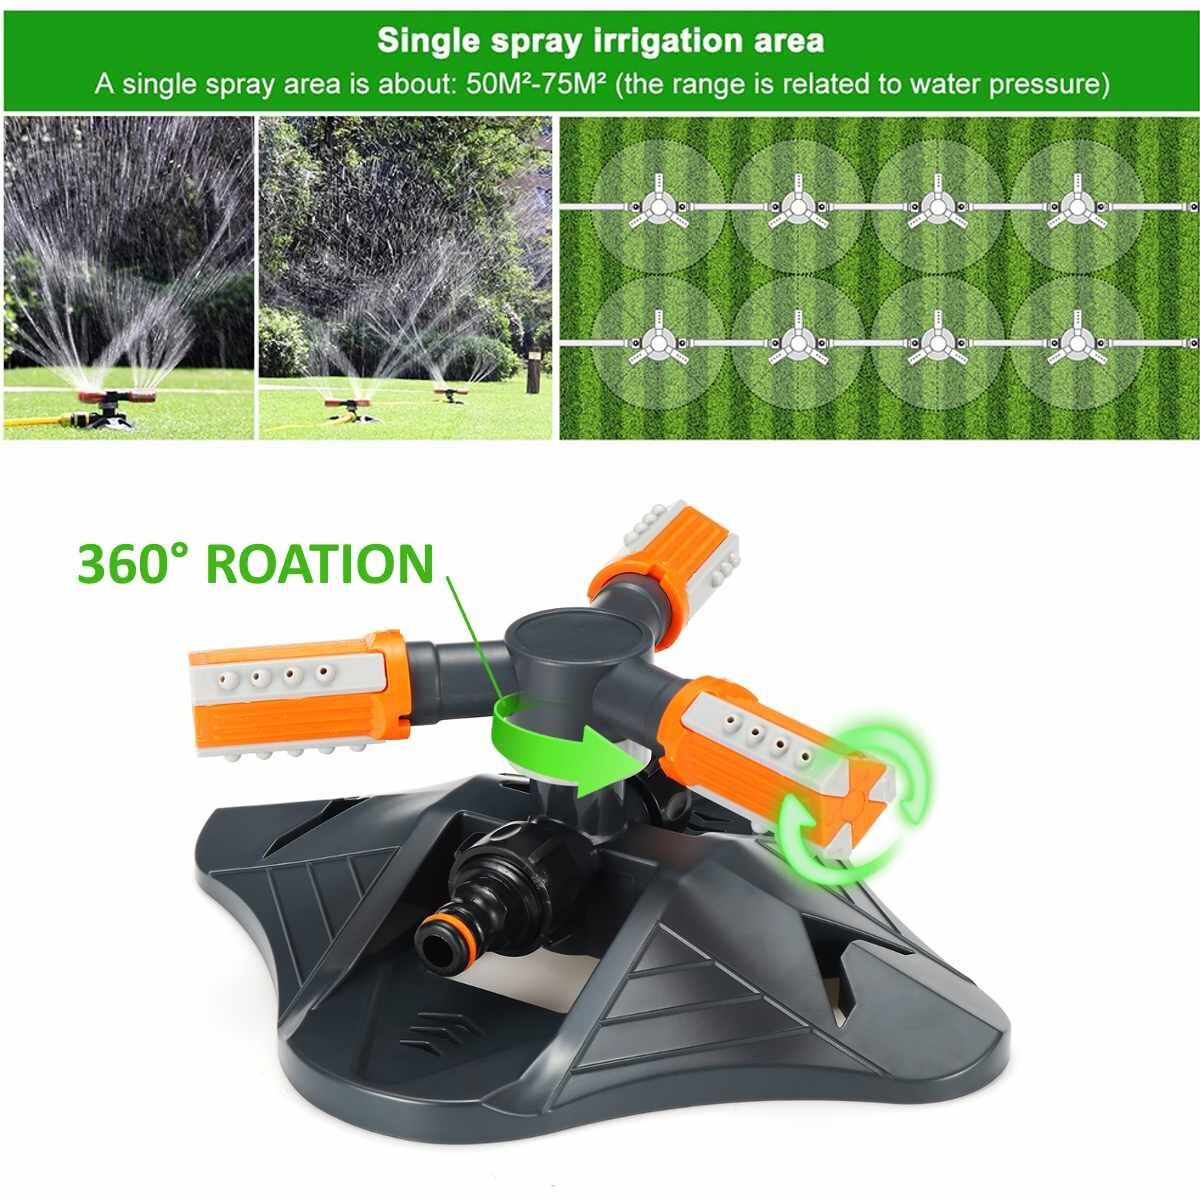 3 Armsx 360° Automatic Garden Sprinklers Watering Grass Lawn Rotary Nozzle Rotating Water Sprinkler System Garden Suppli Green - 6